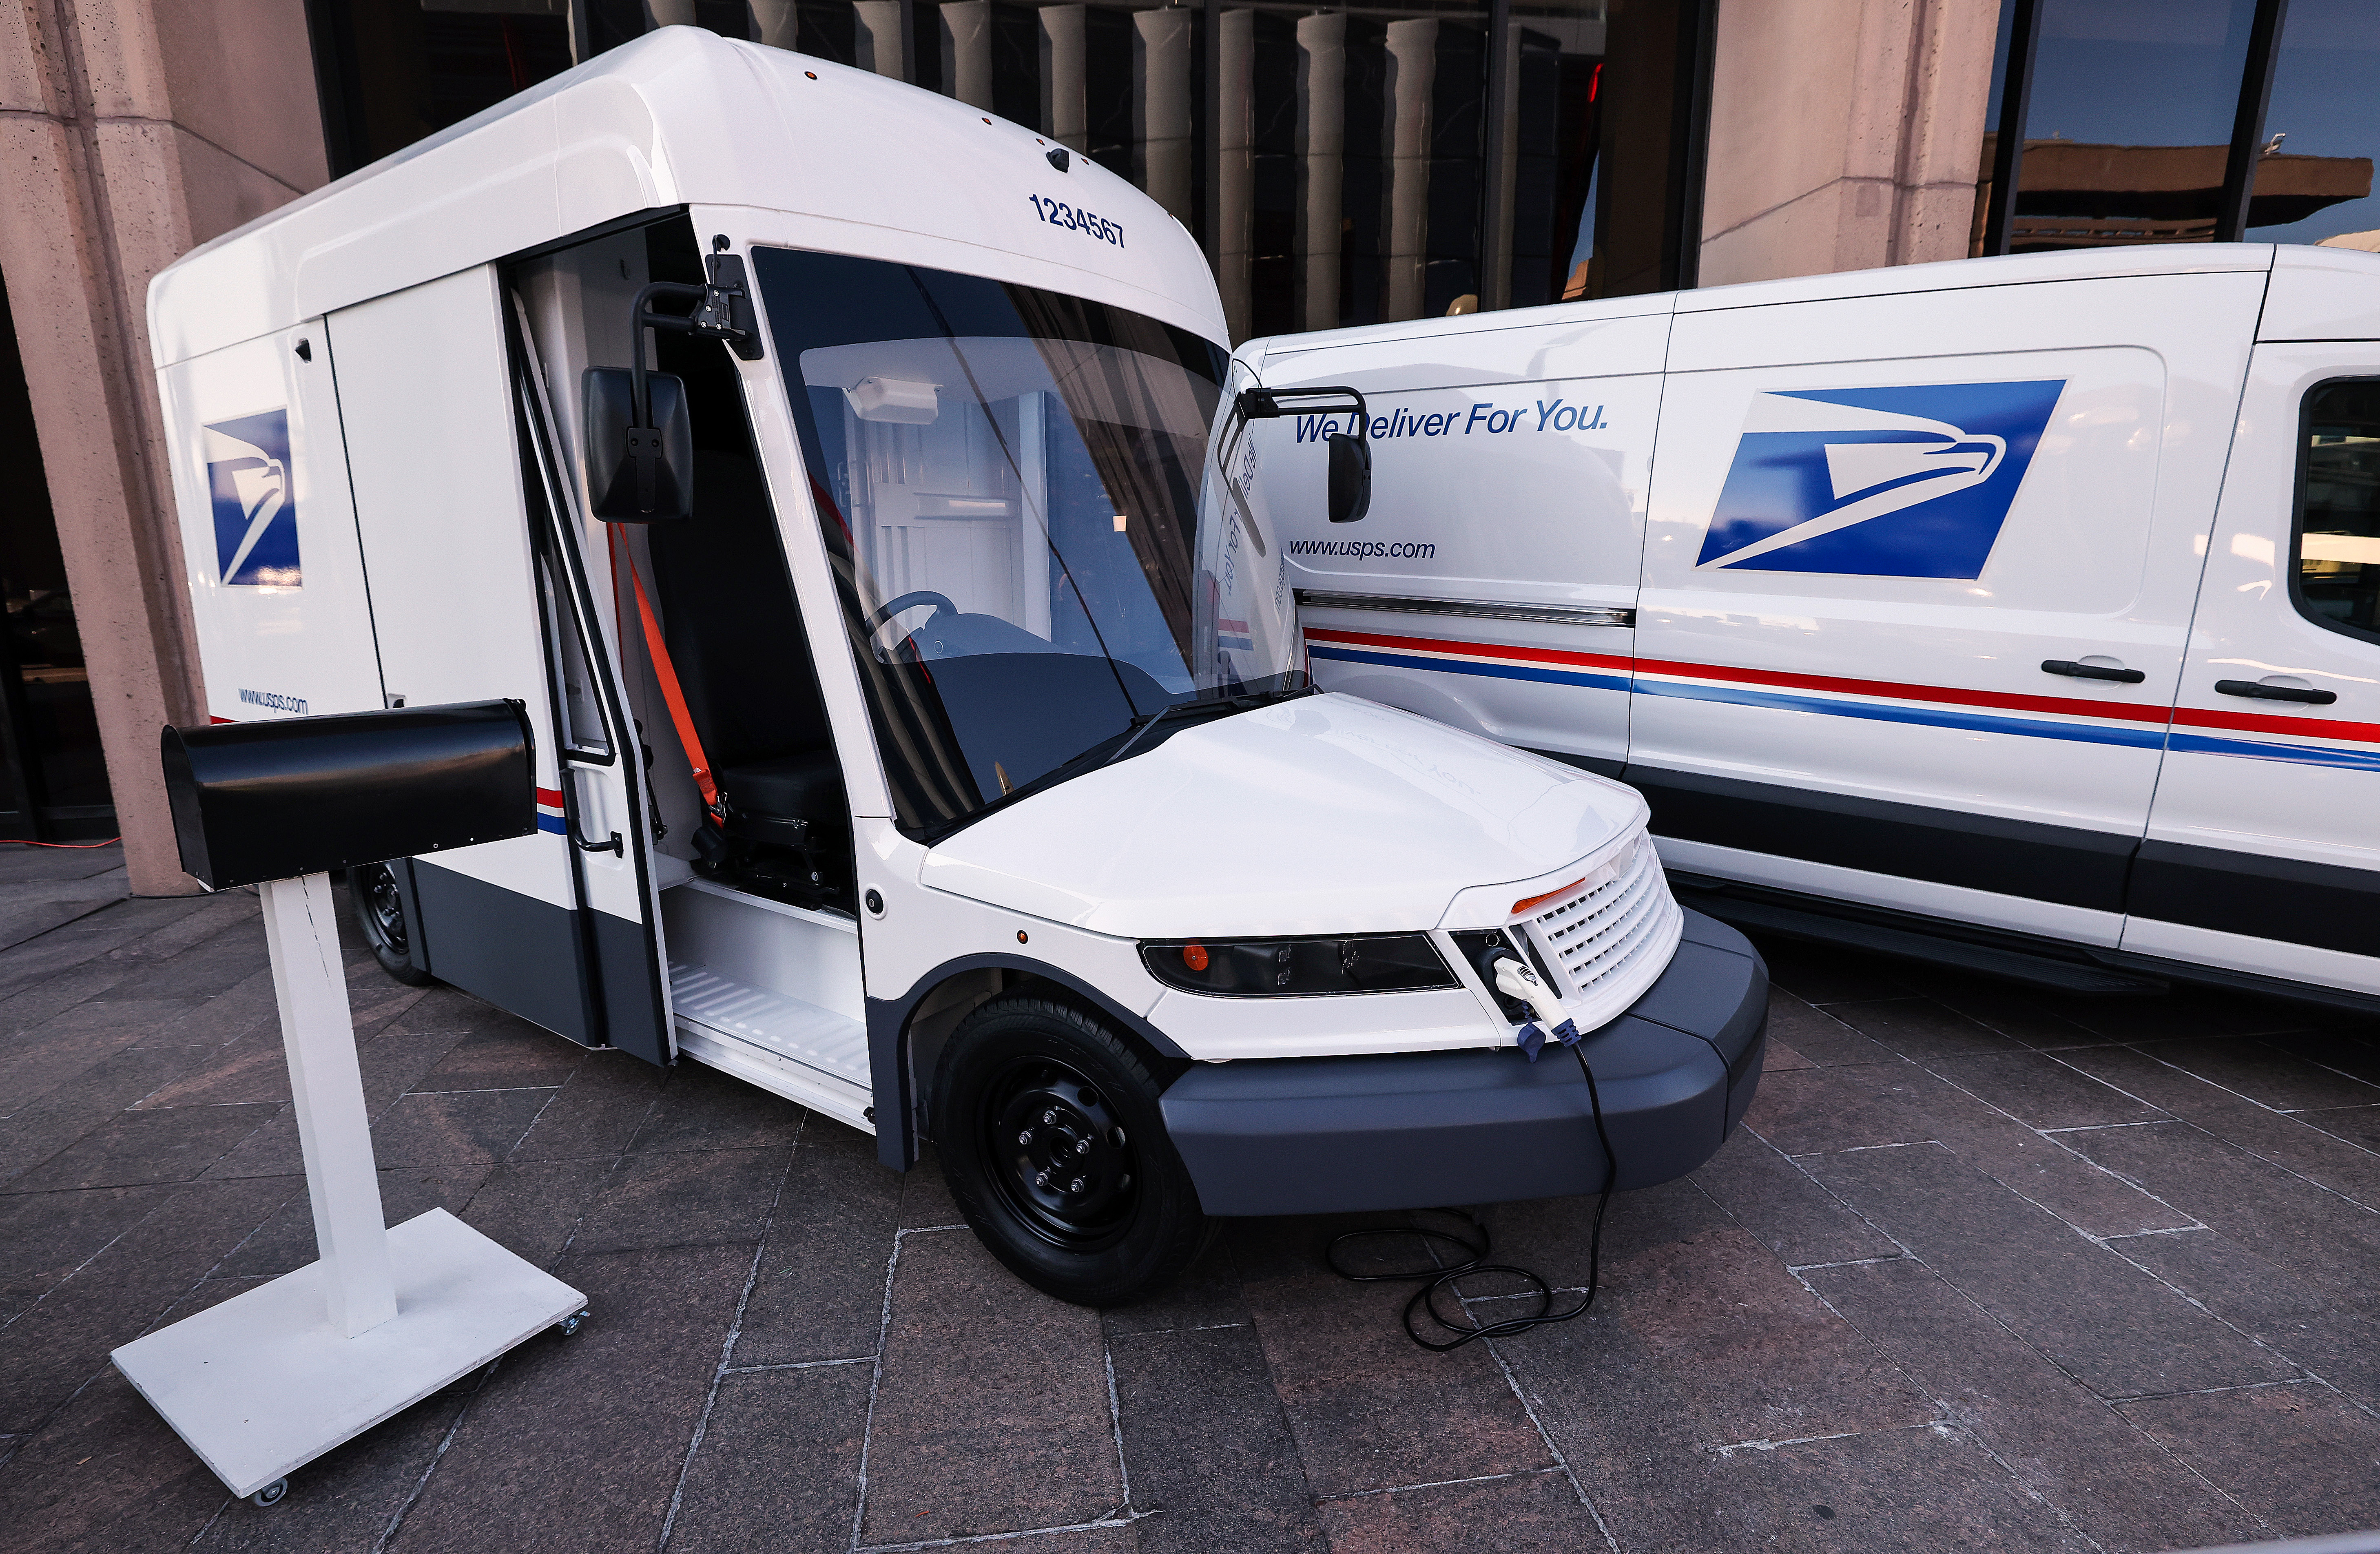 The U.S. Postal Service Makes Announcement About Making Its Postal Service Vehicle Fleet Electric